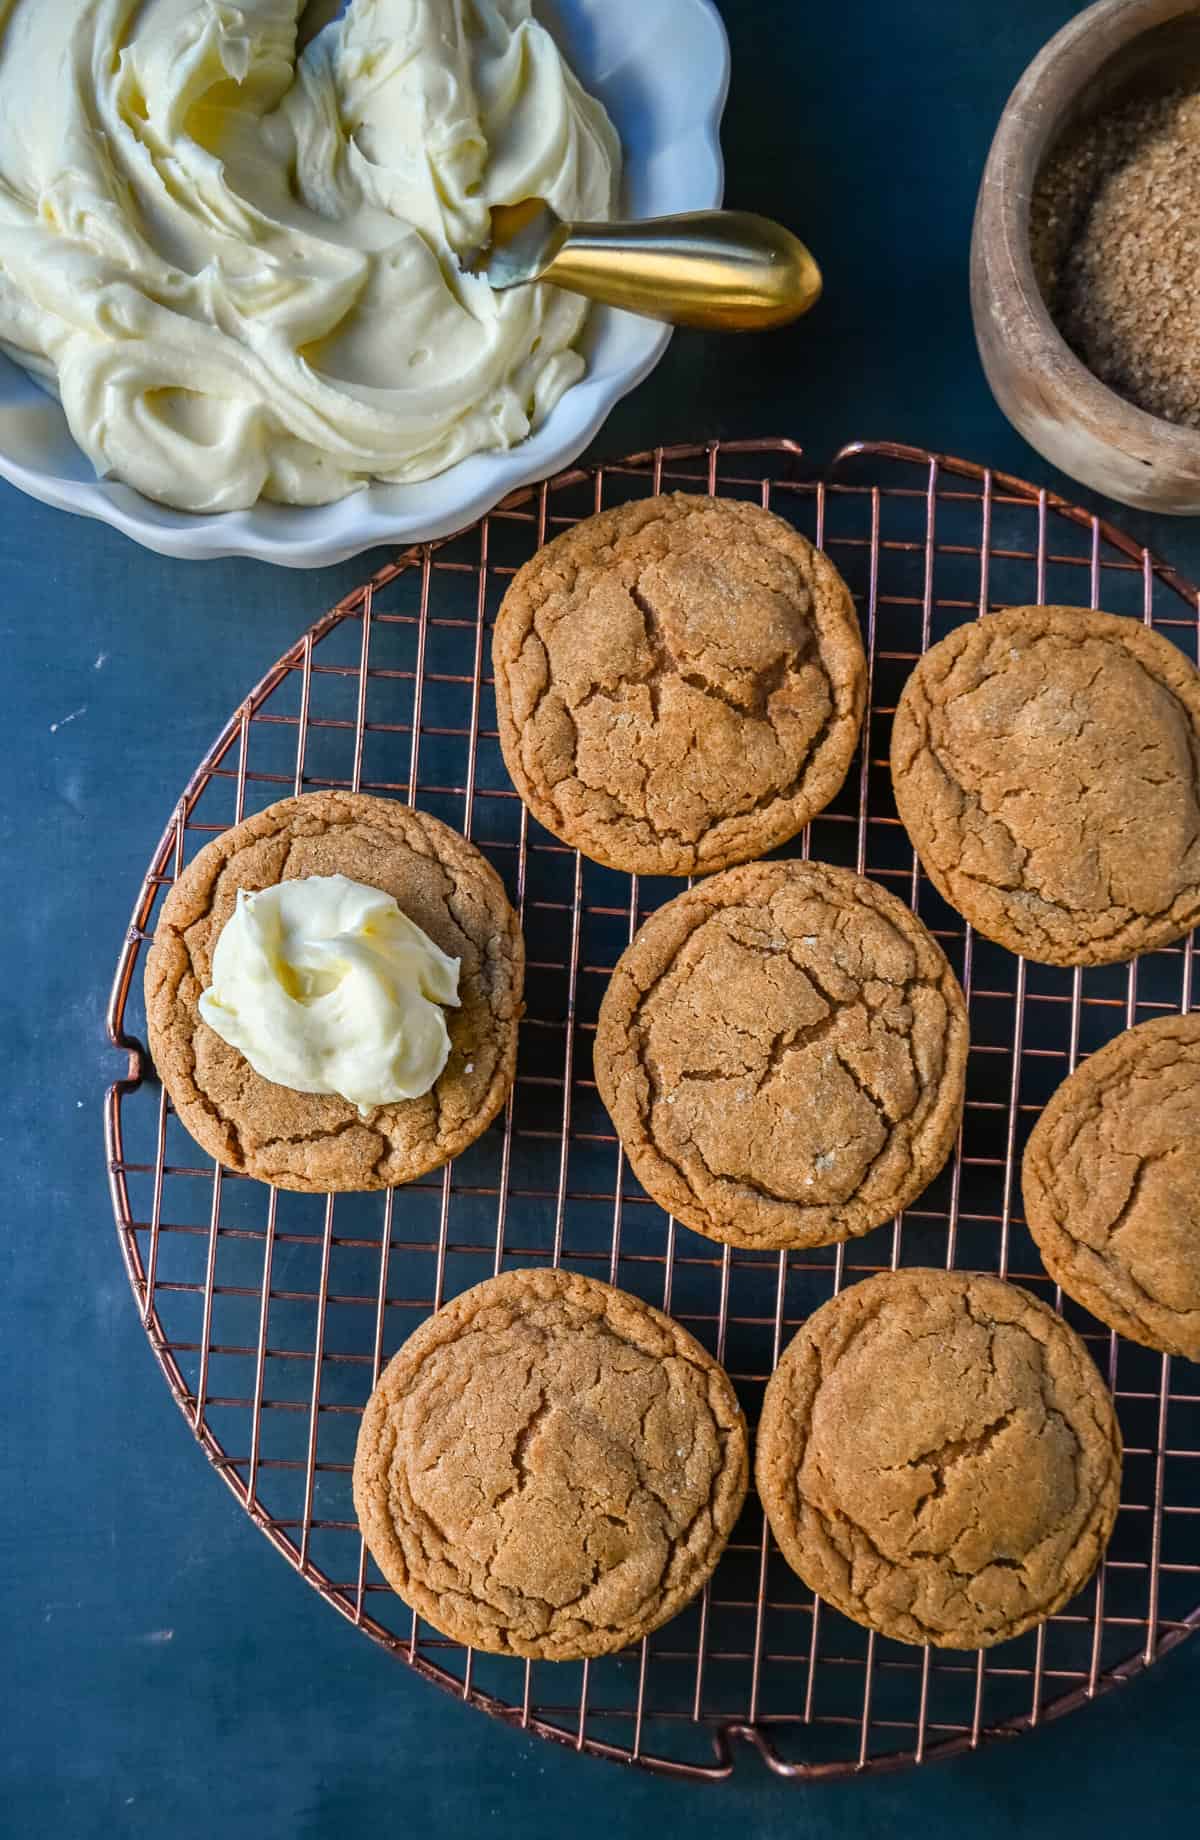 Soft Gingerbread Cookies with Cream Cheese Frosting. These Frosted Molasses Ginger Cookies are the perfect Christmas Cookie. Soft in the center with the perfect crisp edges. The sweet cream cheese frosting pairs perfectly with the spiced gingerbread cookie. This is a quintessential Christmas cookie recipe that gets rave reviews!